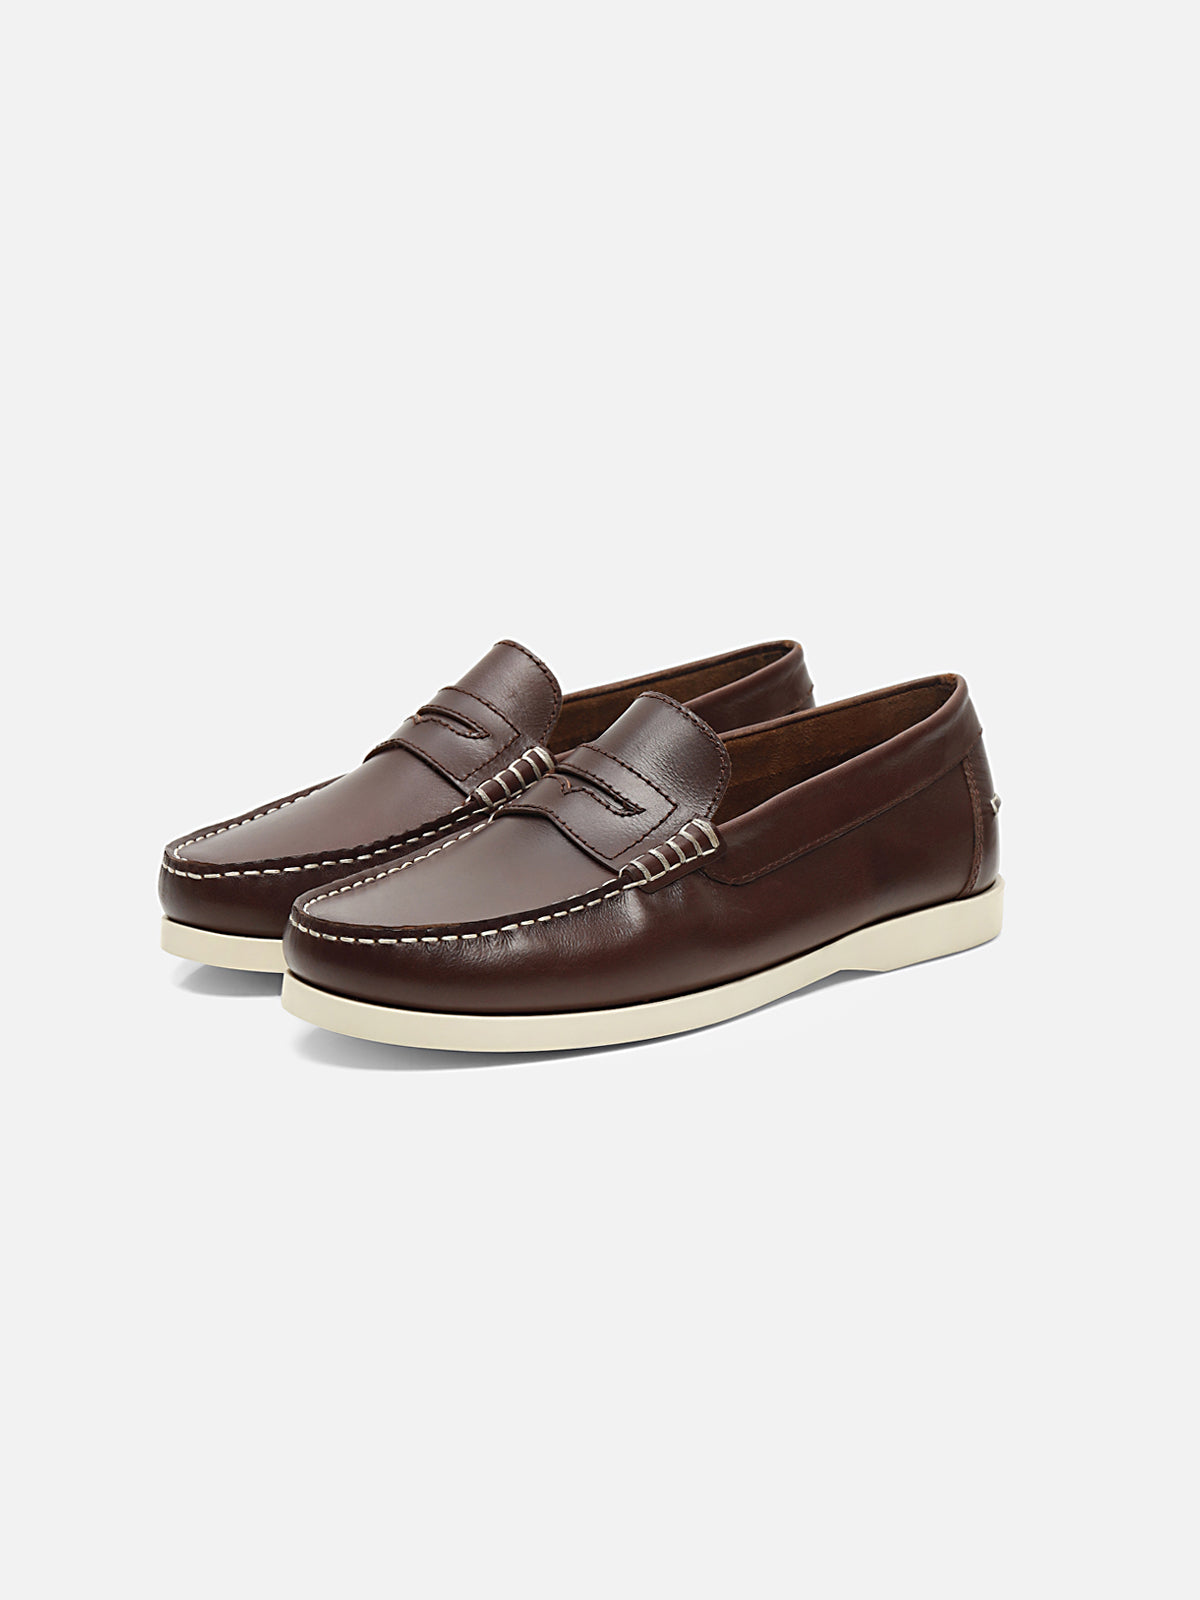 Leather Penny Loafer Shoe - FAMS24-038